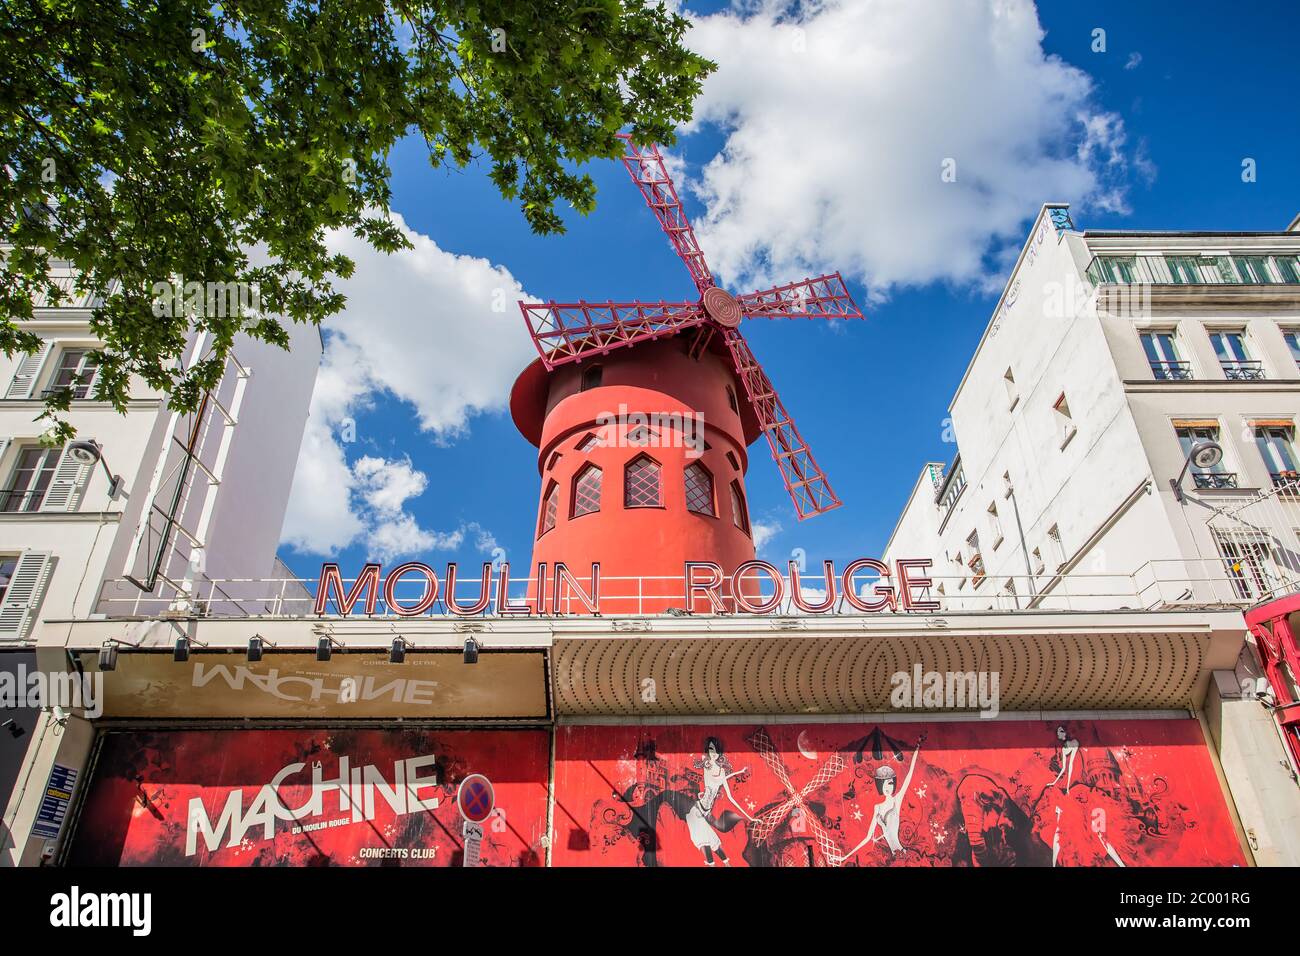 PARIS - MAY 15: The Moulin Rouge , on May 15, 2014 in Paris, France. Moulin Rouge is a famous cabaret built in 1889, locating in Stock Photo